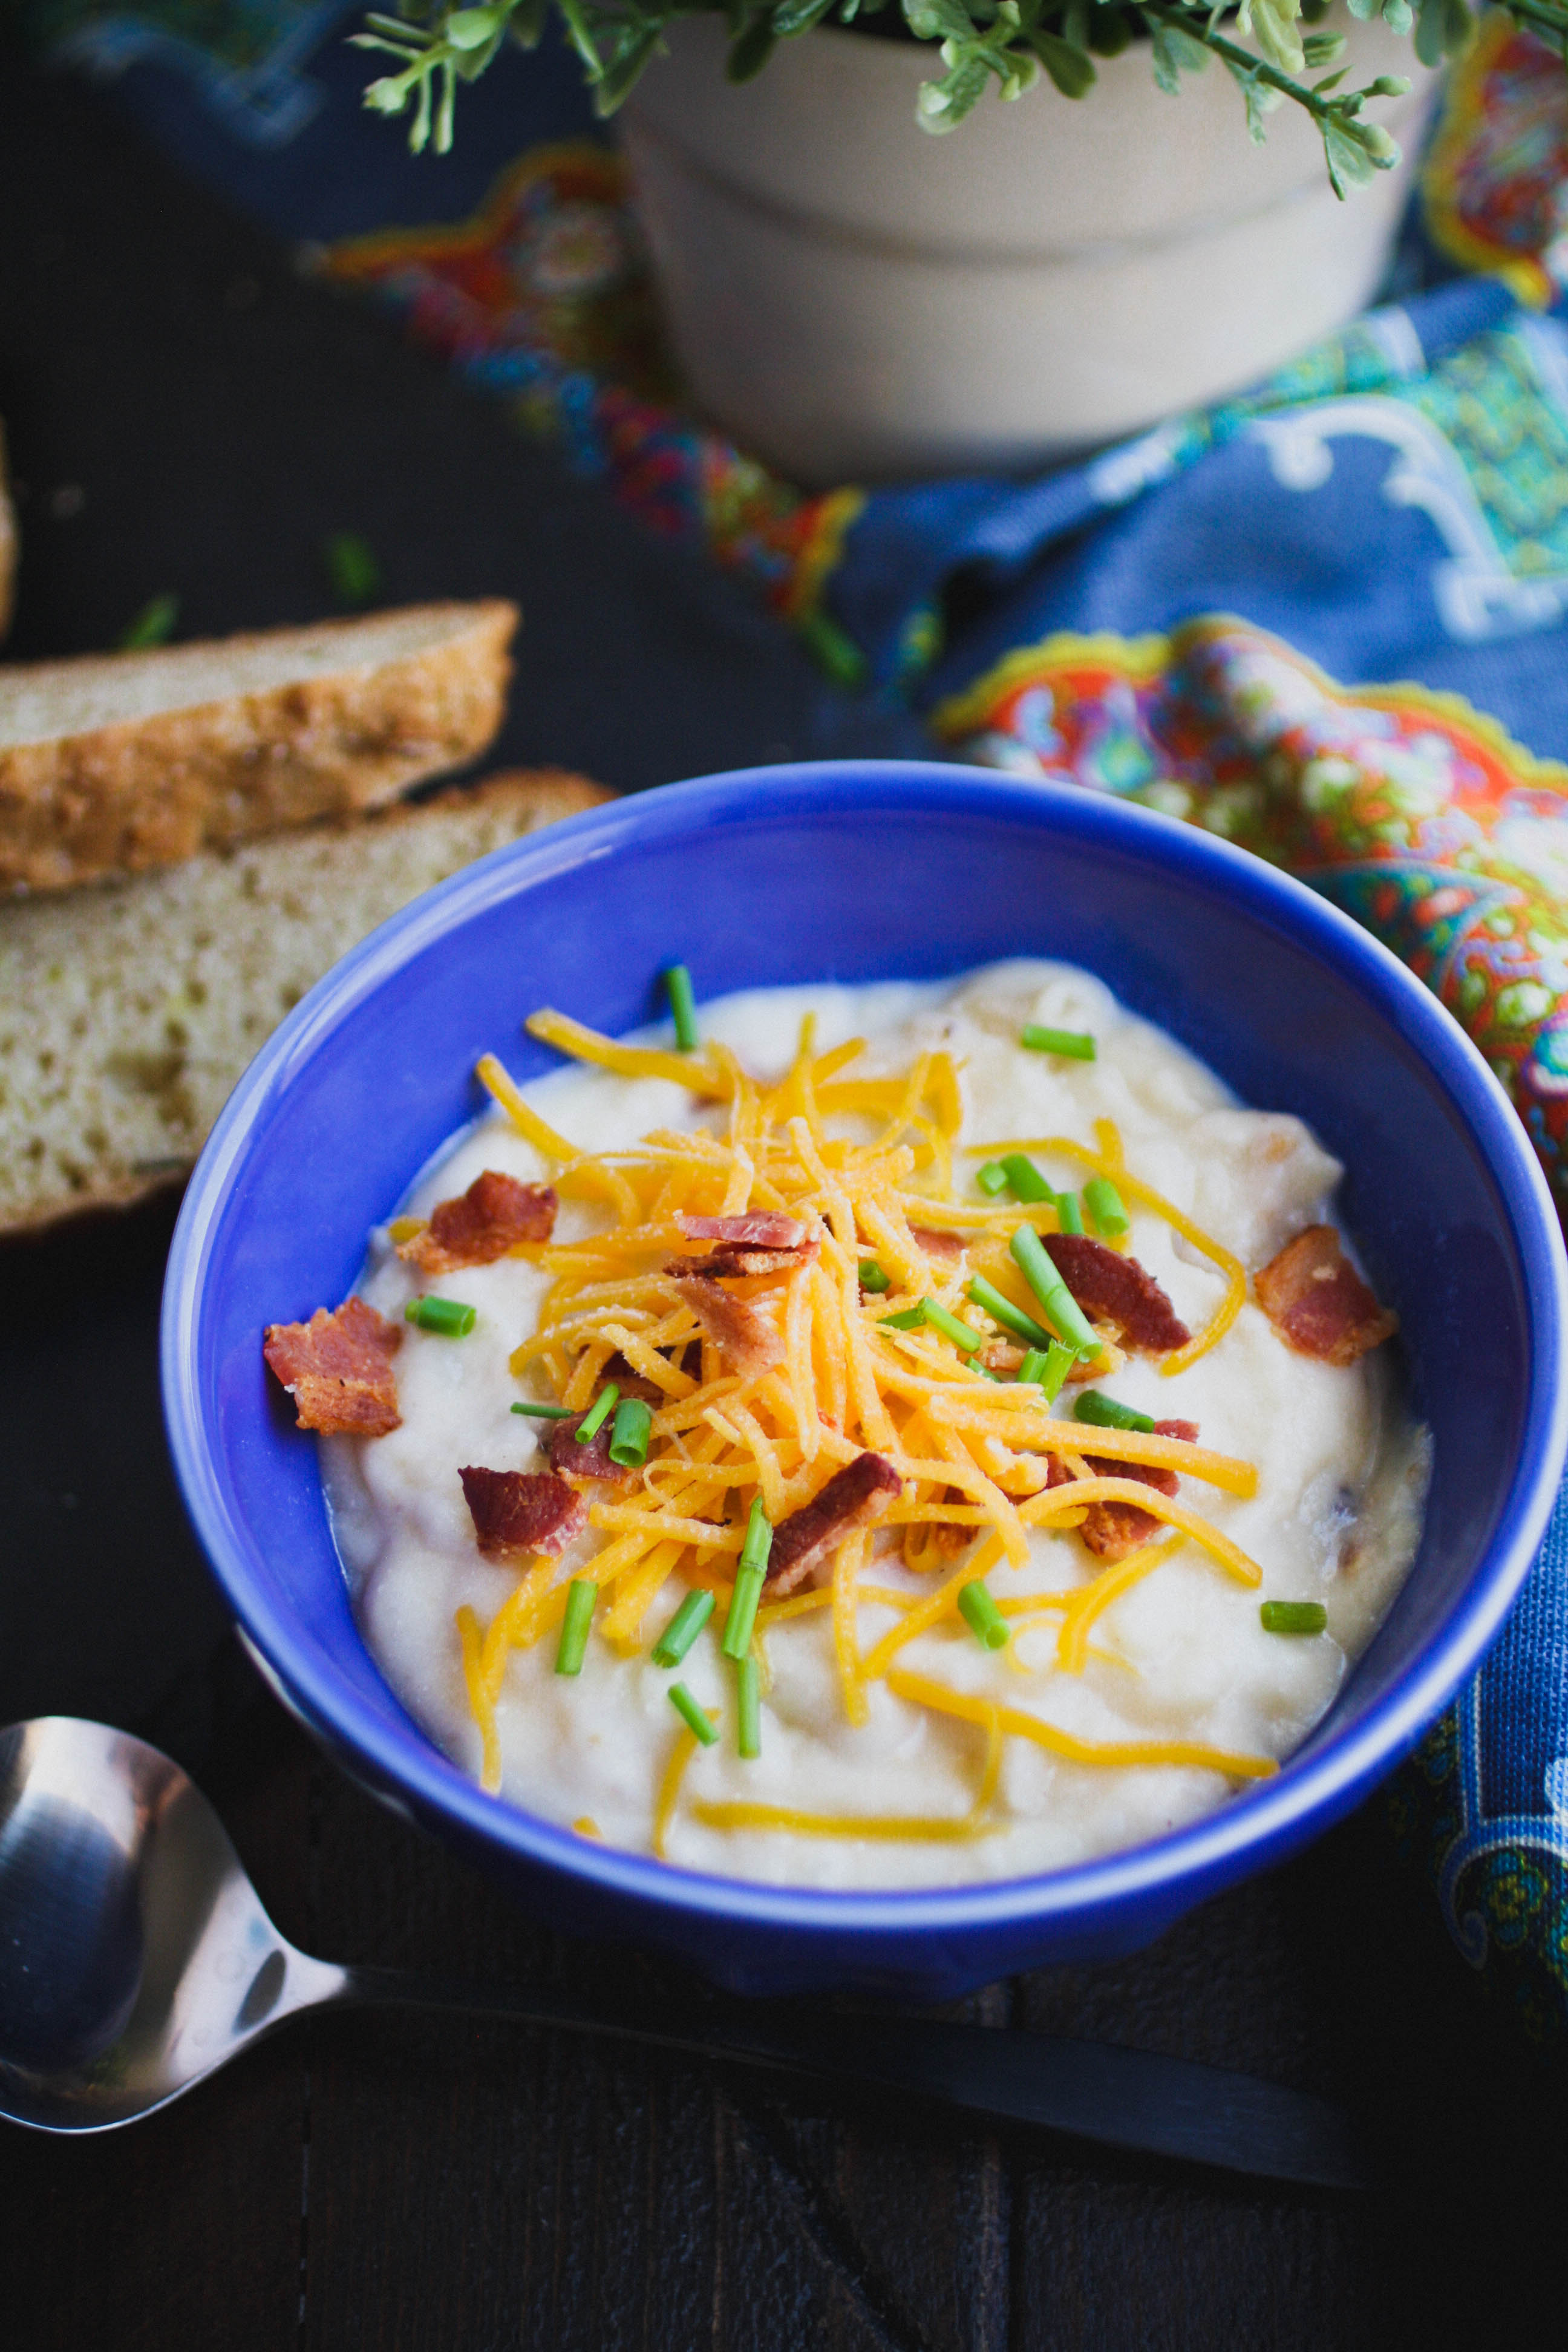 Loaded Baked Potato Soup is perfect to serve on chilly days. Loaded Baked Potato Soup is what you need for St. Patrick's Day!